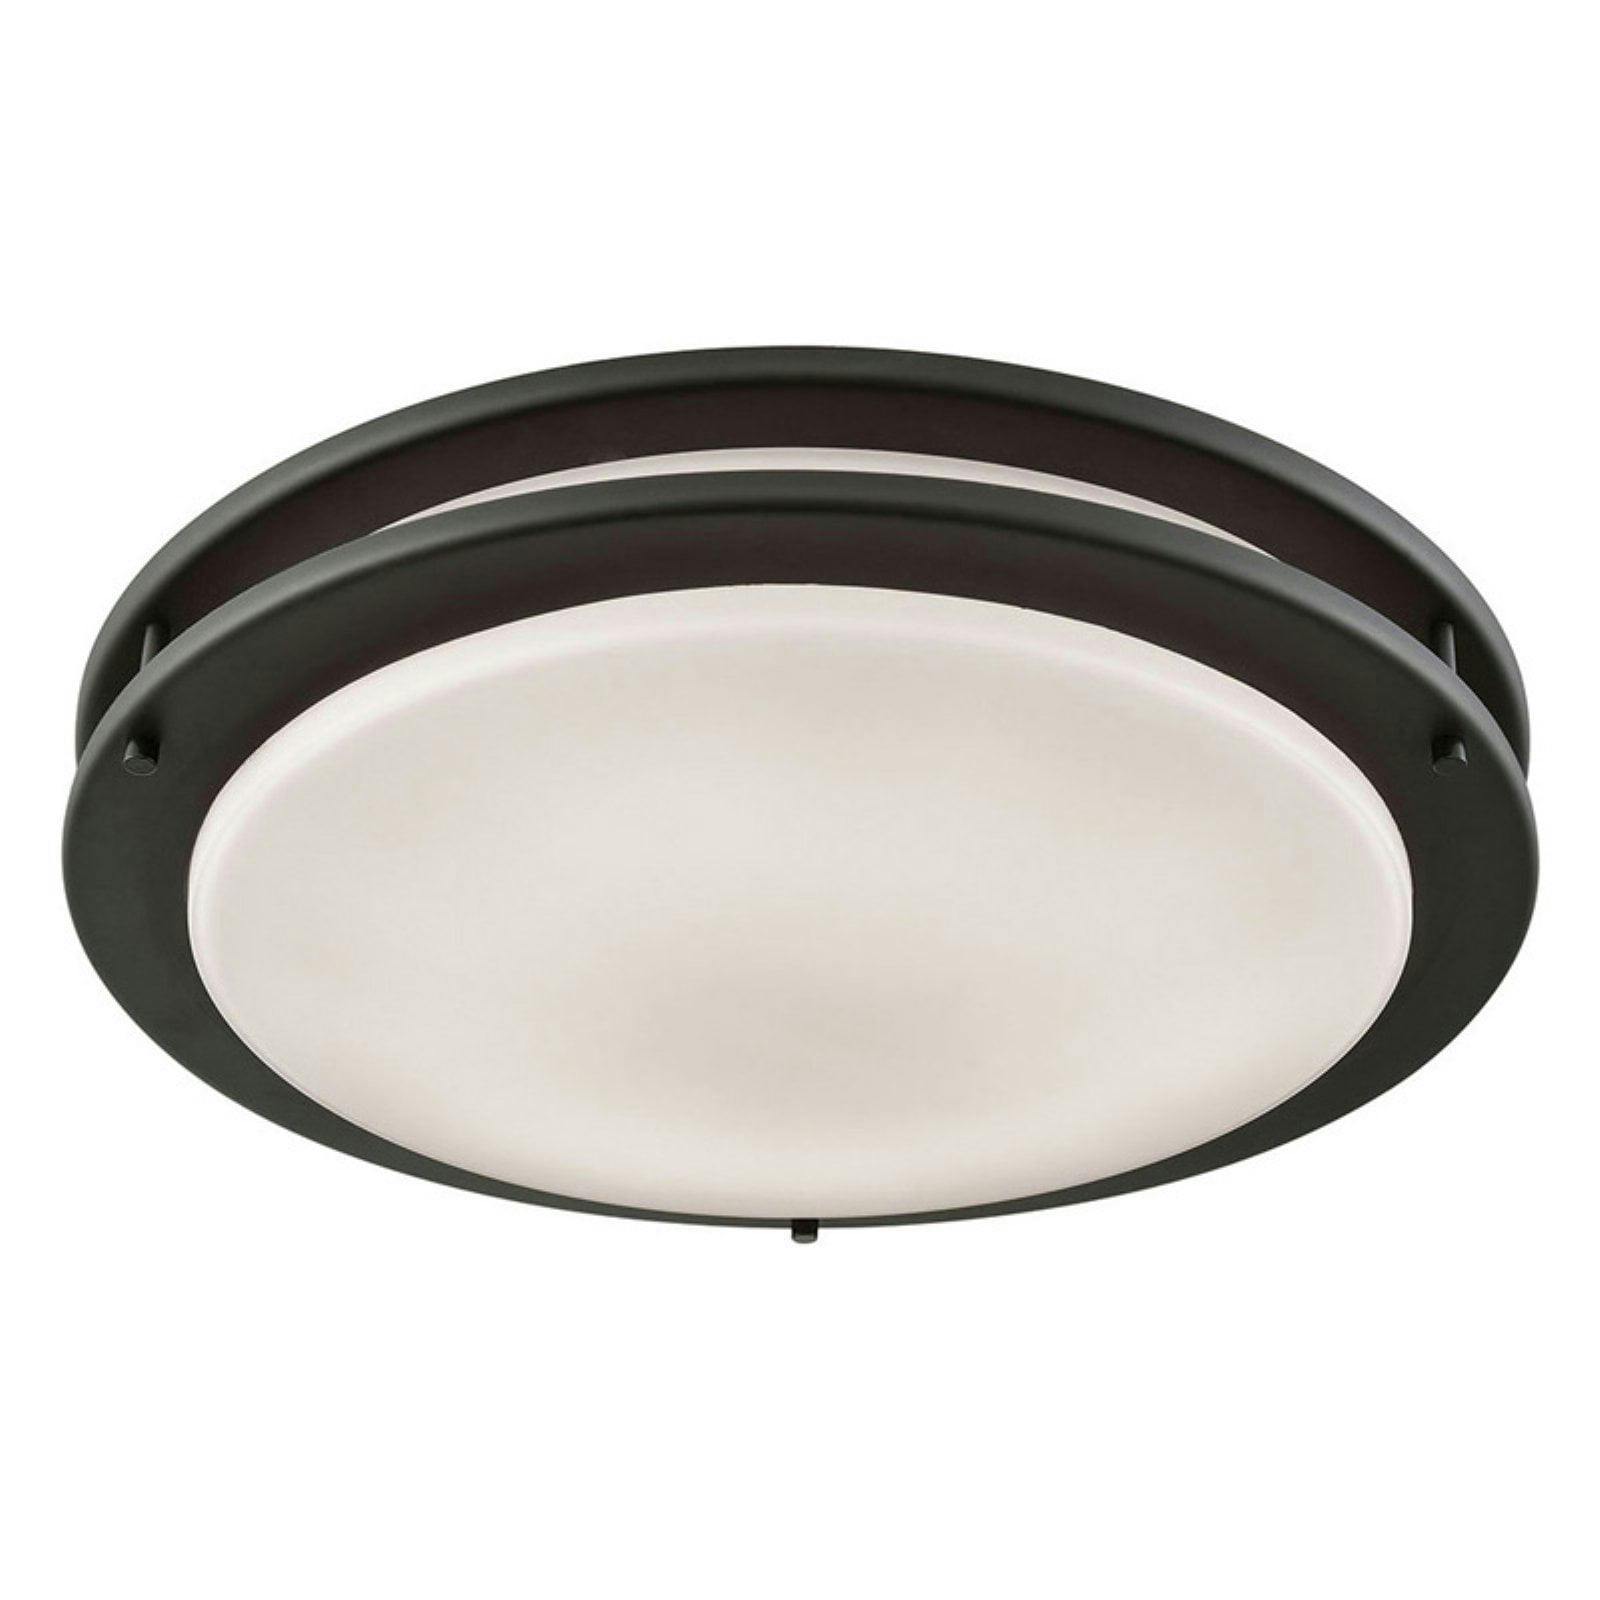 Clarion 18" LED Flush Mount Ceiling Light in Oil Rubbed Bronze with Frosted Glass